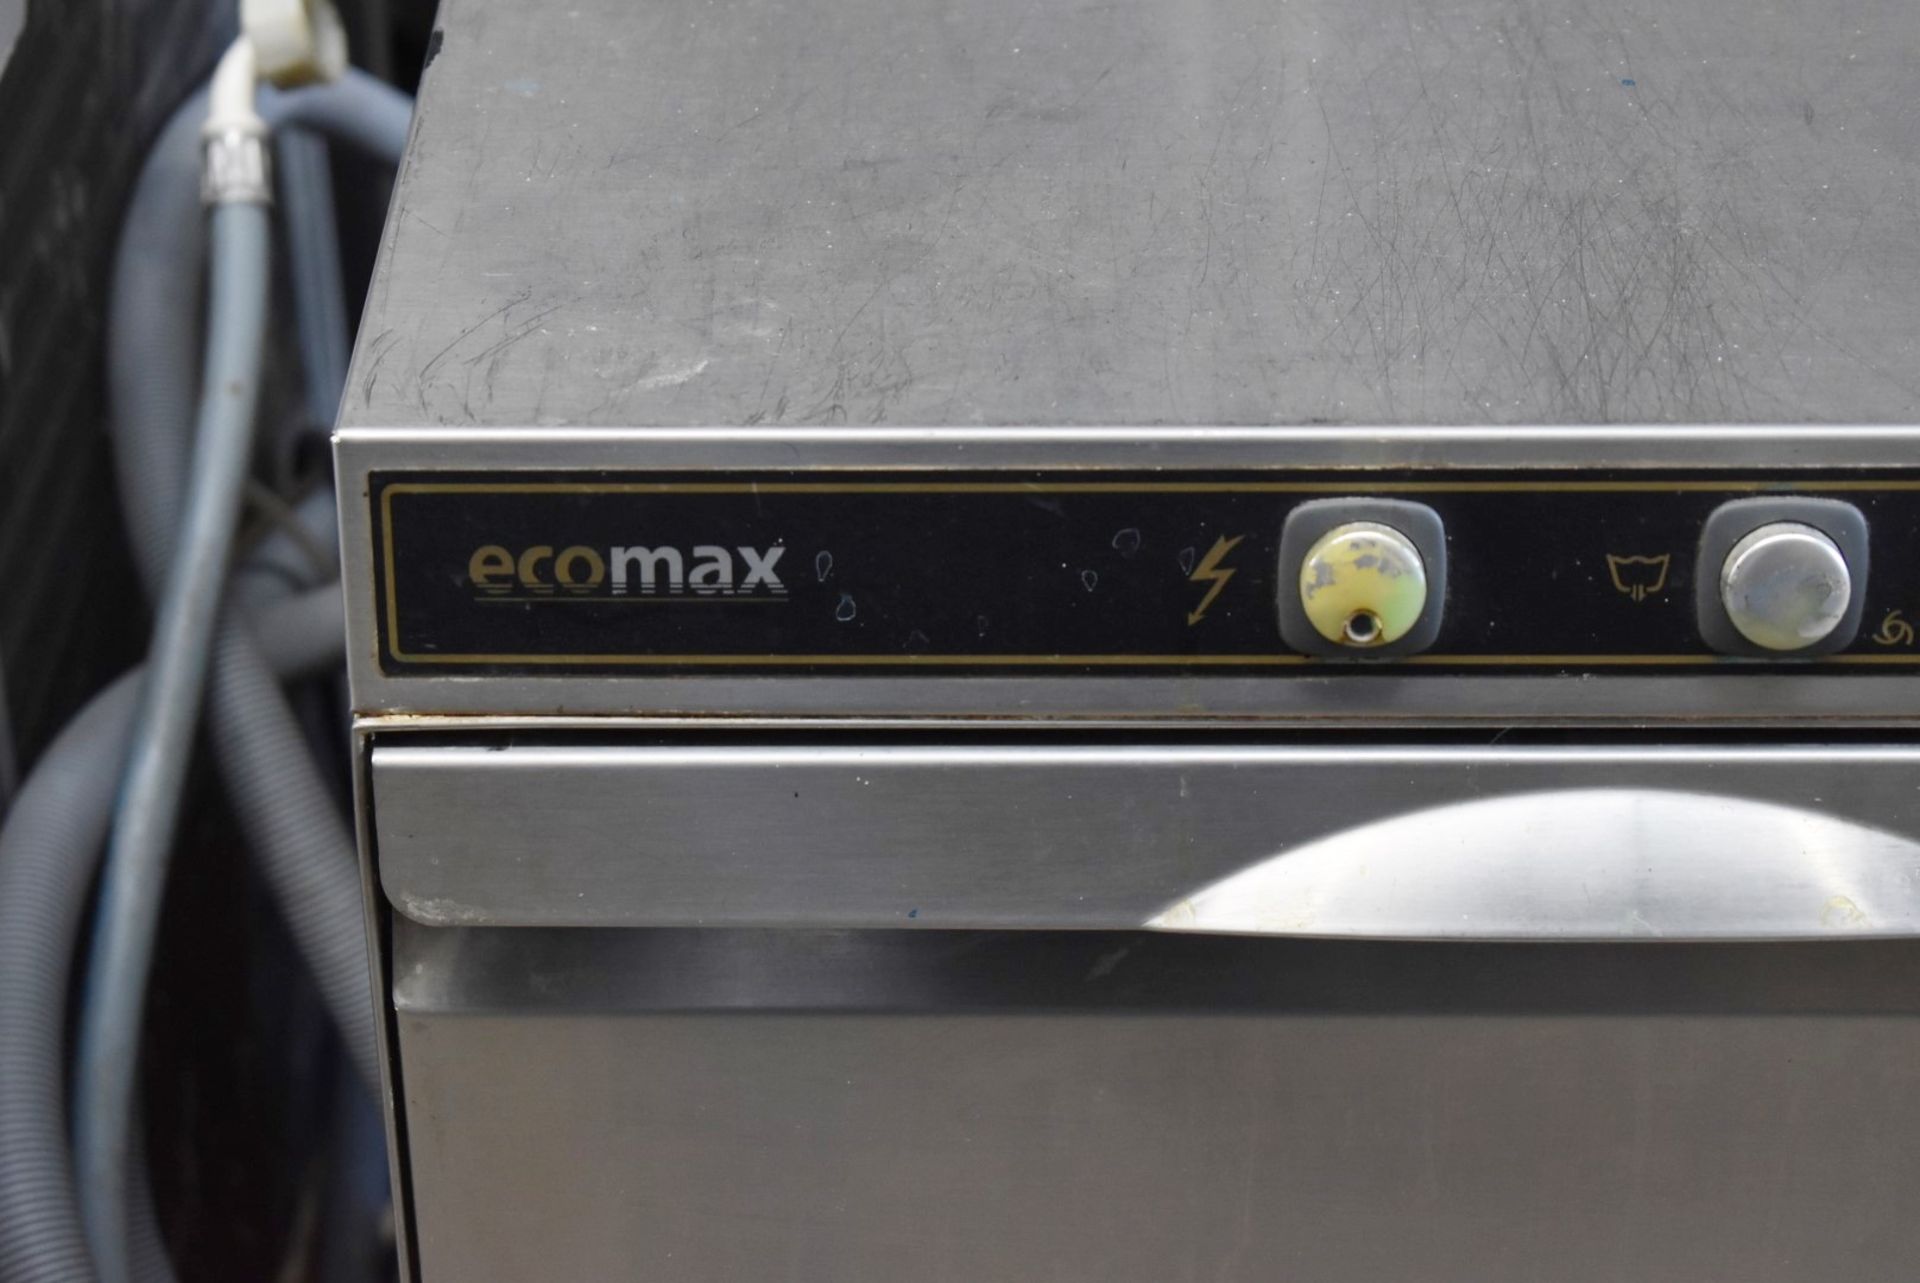 1 x Hobart Ecomax Undercounter 240v Glass Washer - Model CLG25DNA - 44cm Width - Image 3 of 10